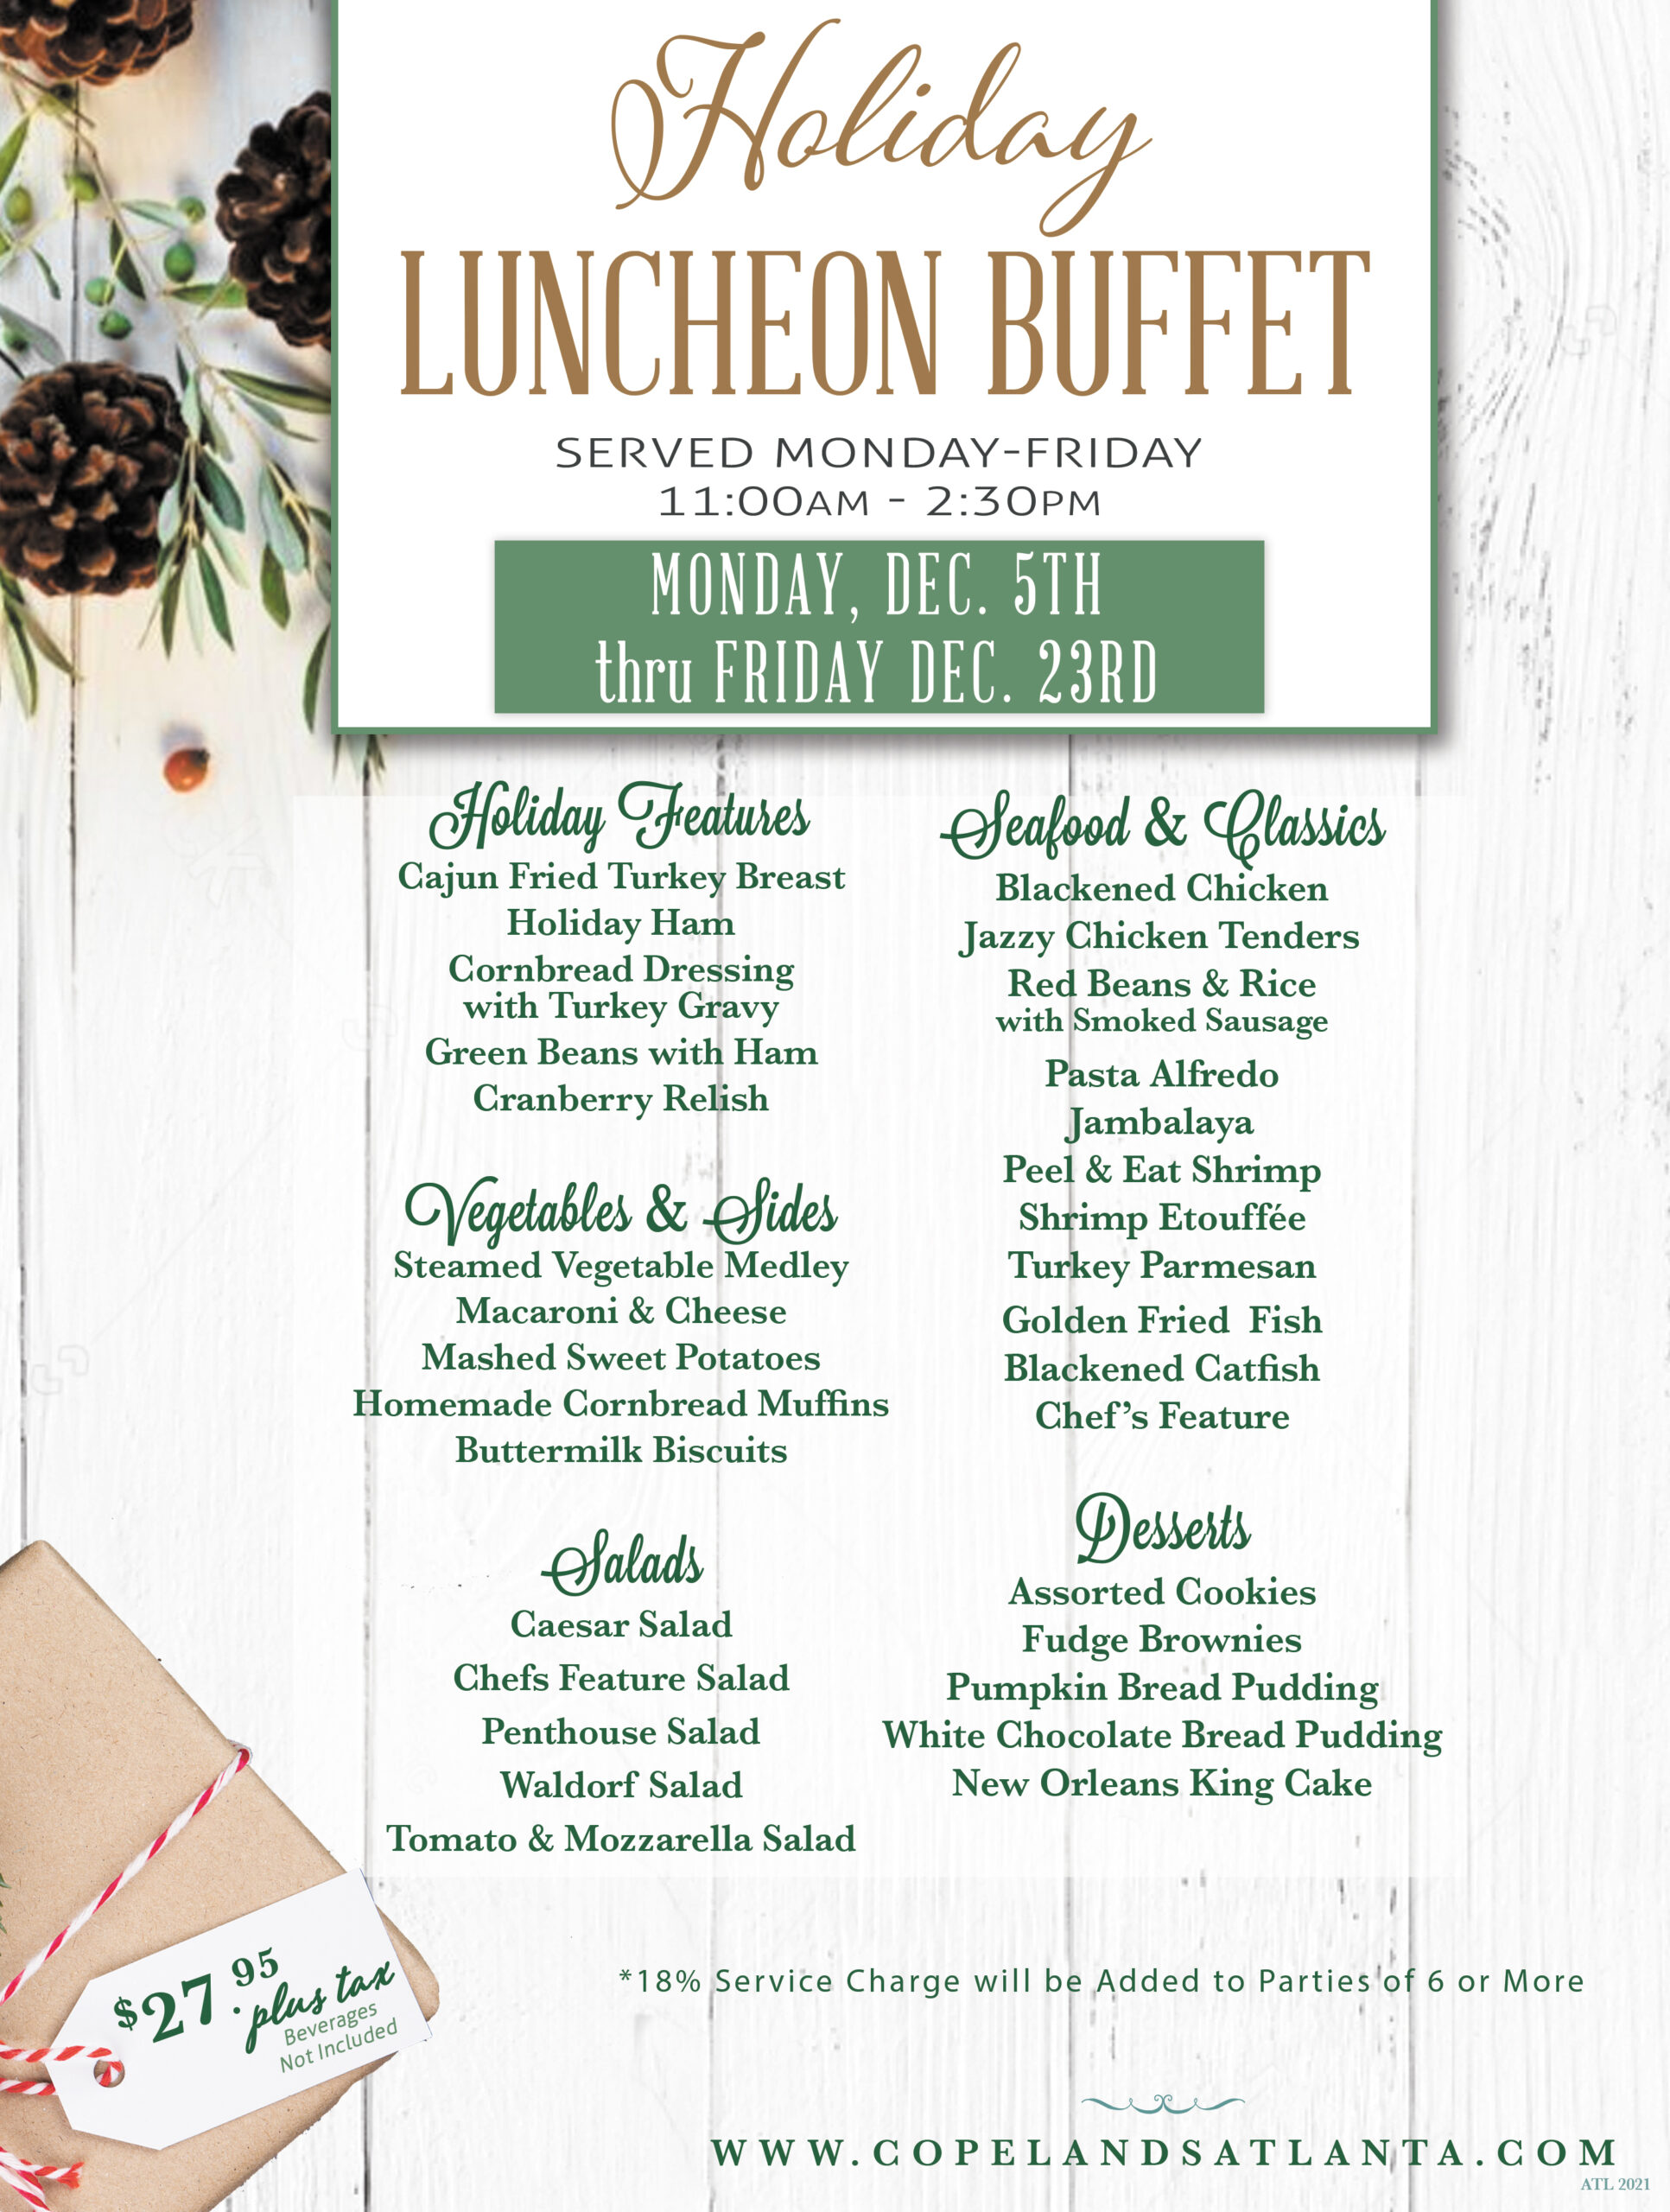 the full holiday luncheon buffet menu. For more information, please contact us.